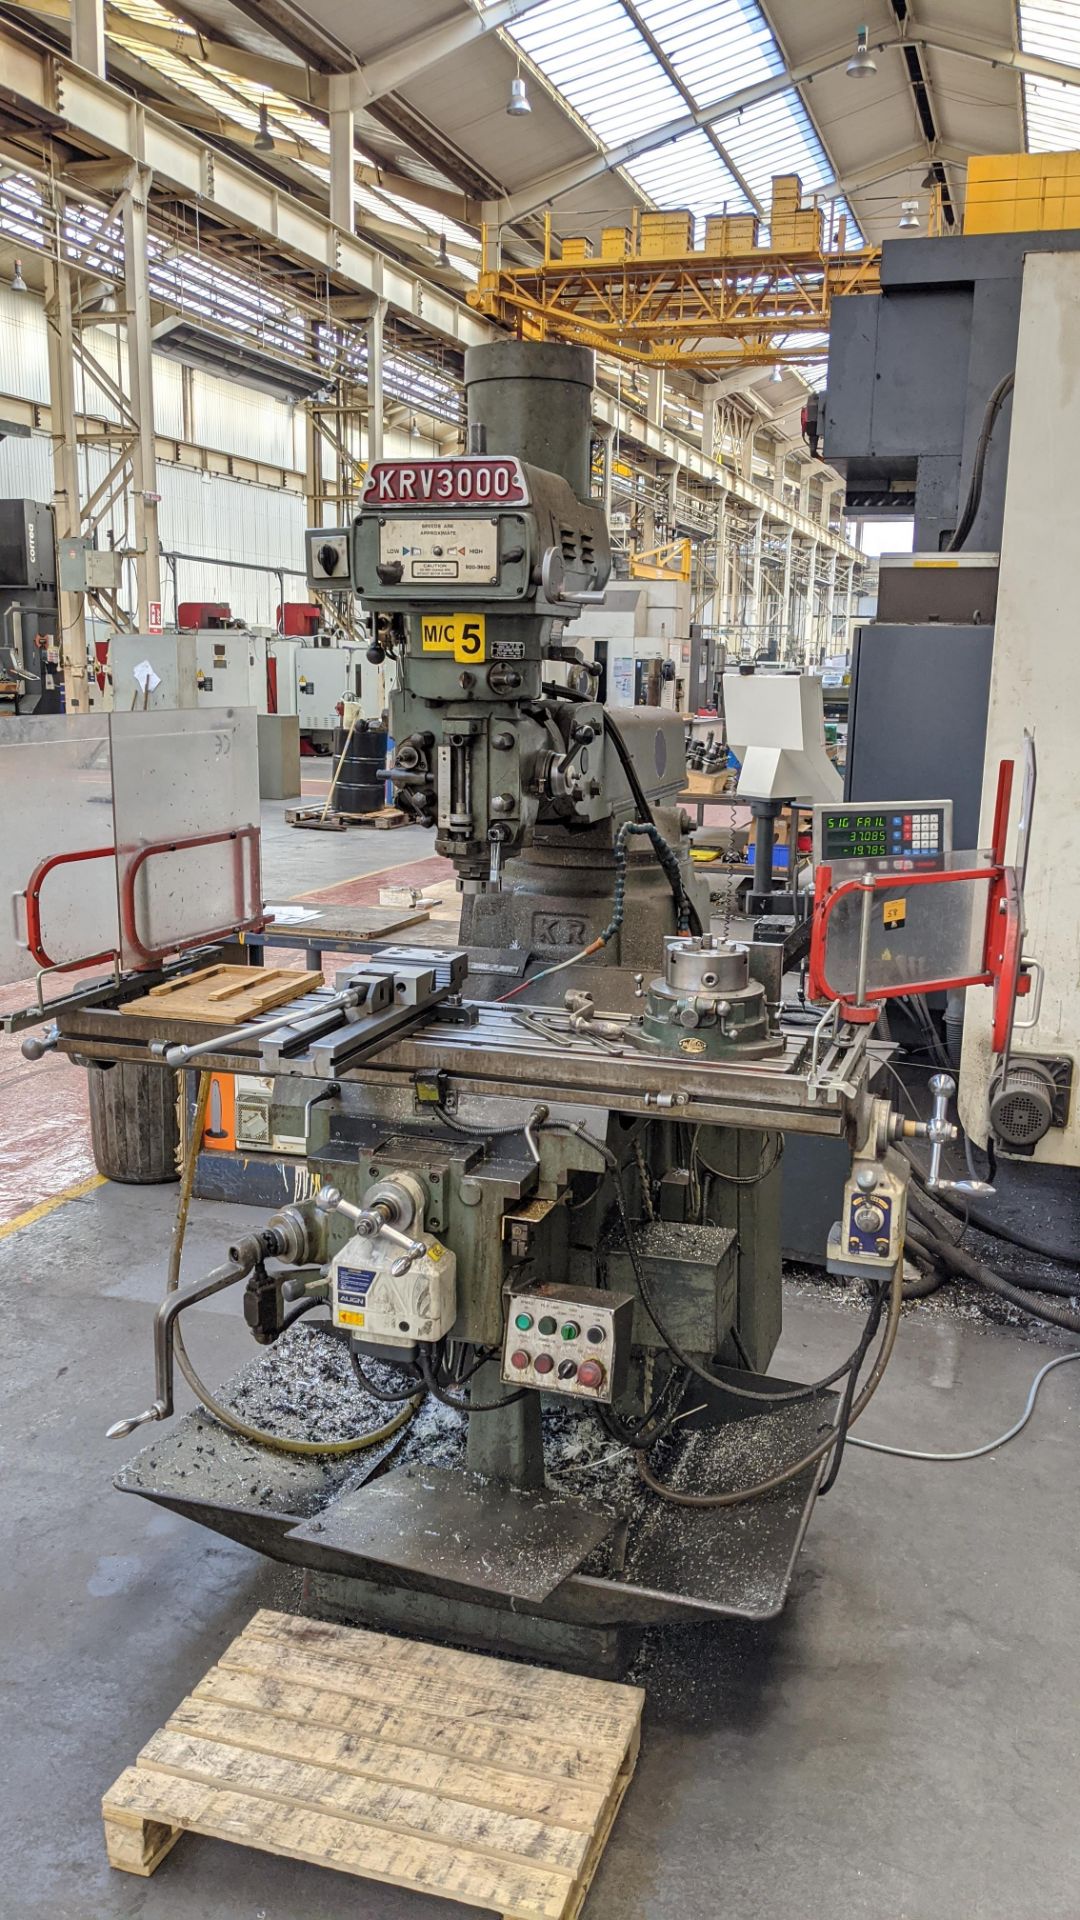 1998 King Rich KRV3000-V milling machine, serial no. 8470. Includes Newall Topaz Mill controller. - Image 15 of 15